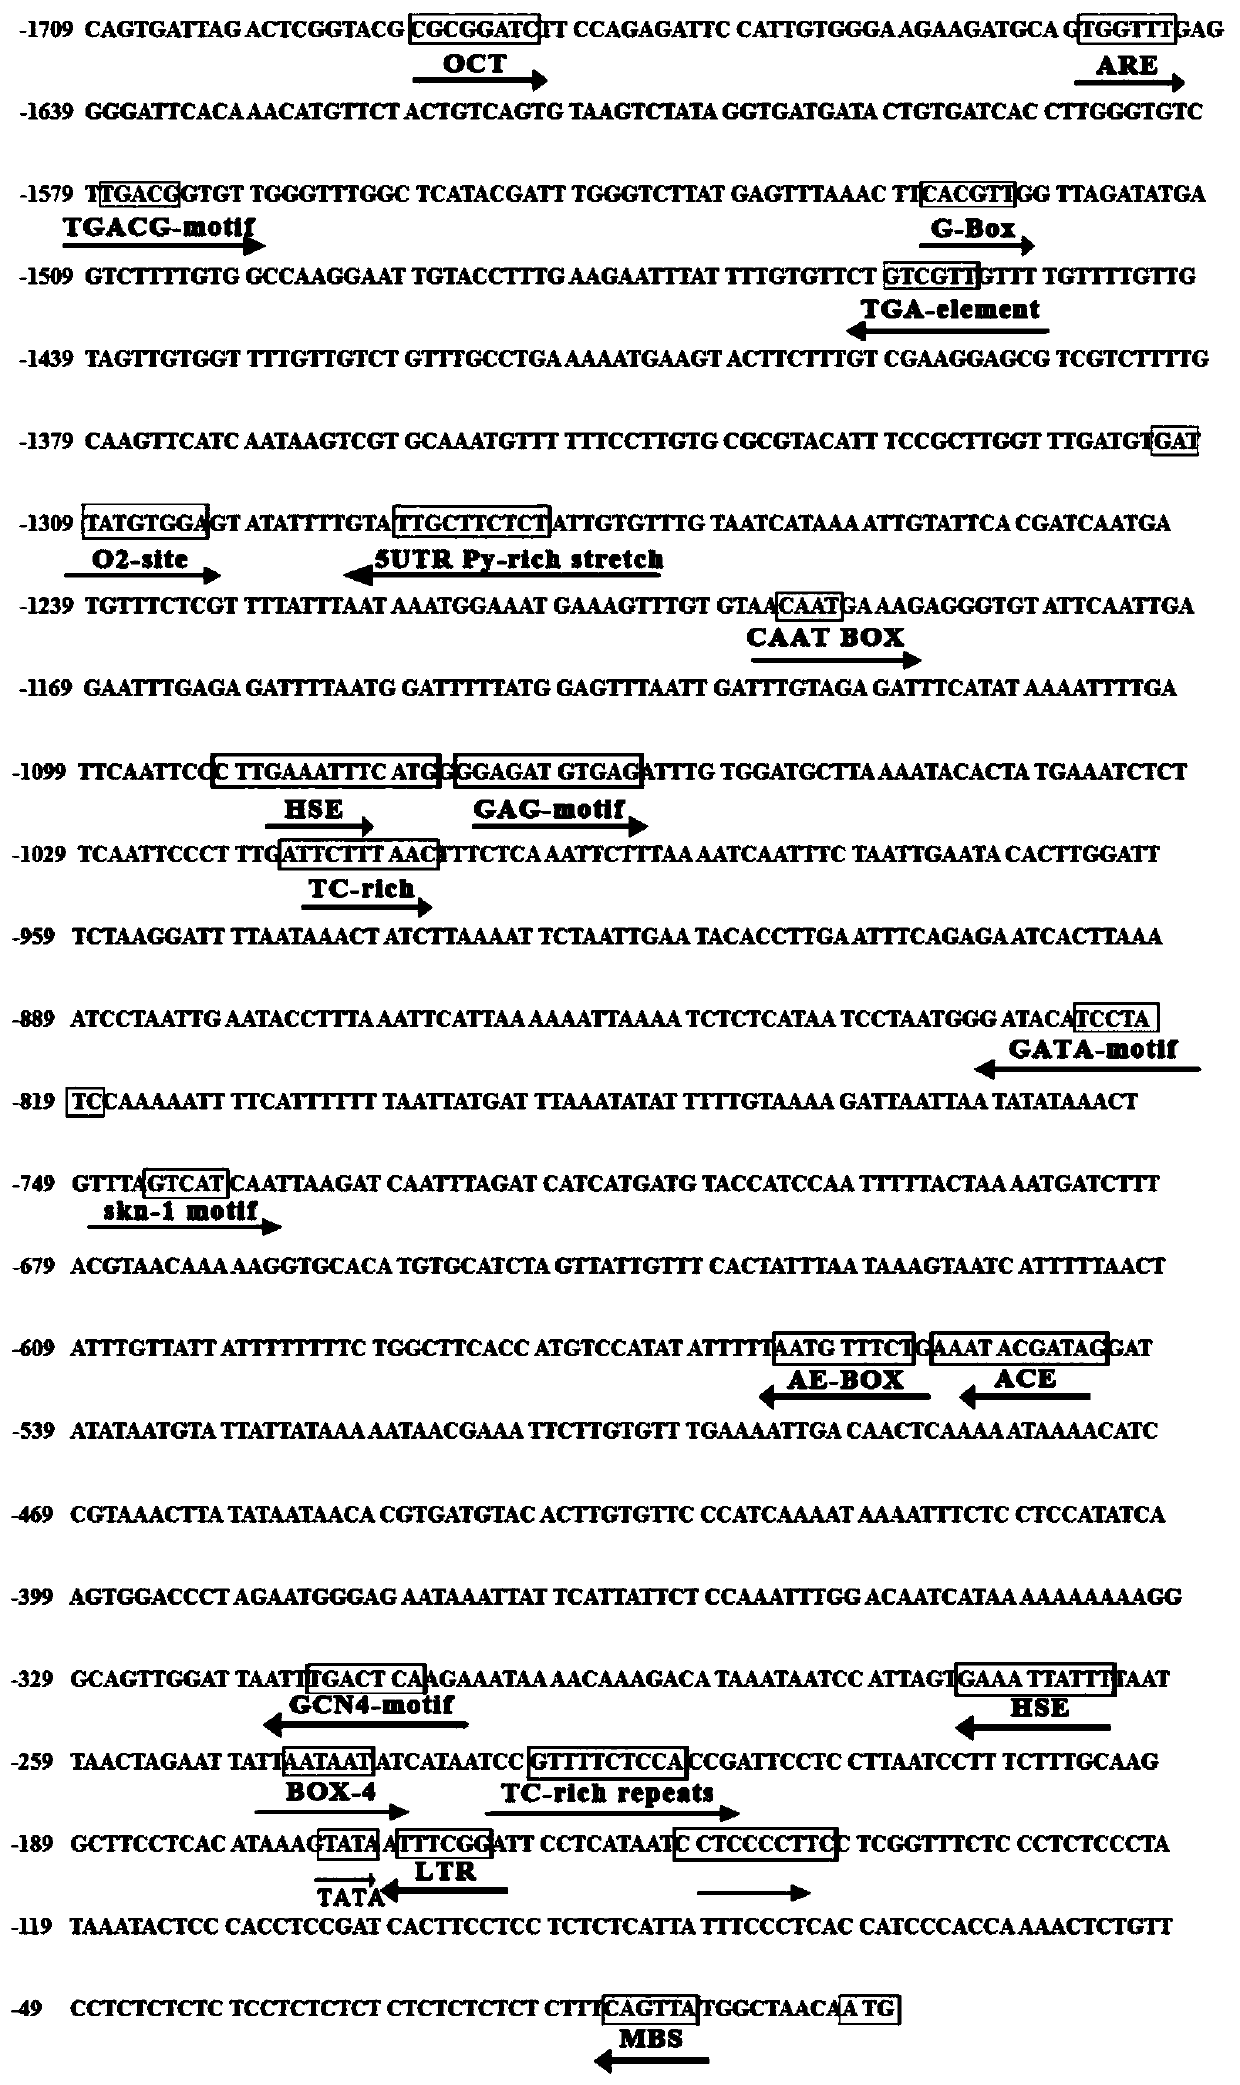 Promoter sequence of fructokinase gene in apple, and deletion mutants and application of